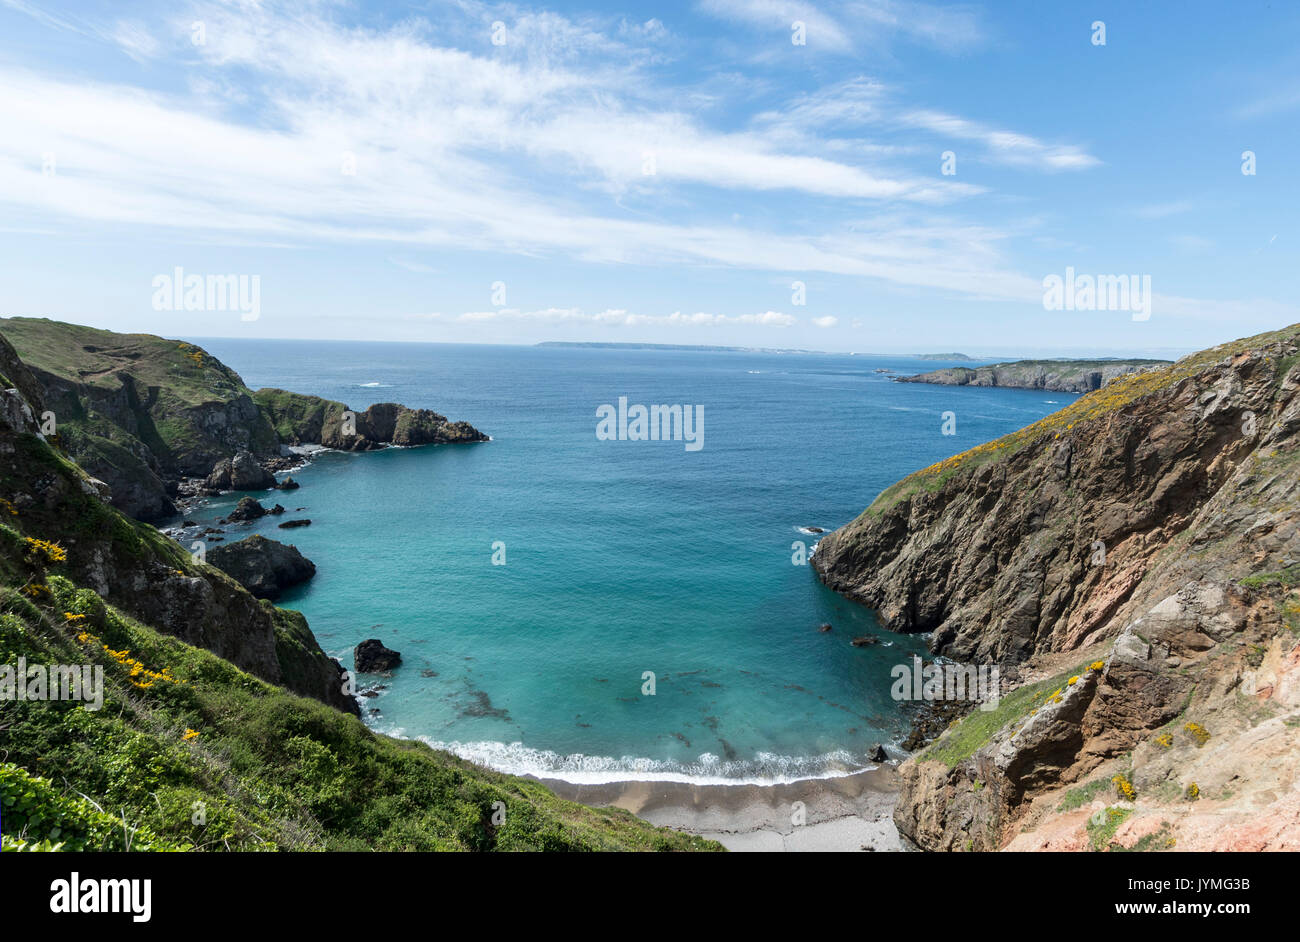 From La Coupee , a 300 foot drop narrow causeway in the Isle of Sark towards Guernsey in the distance in the Channel Islands, Britain Stock Photo